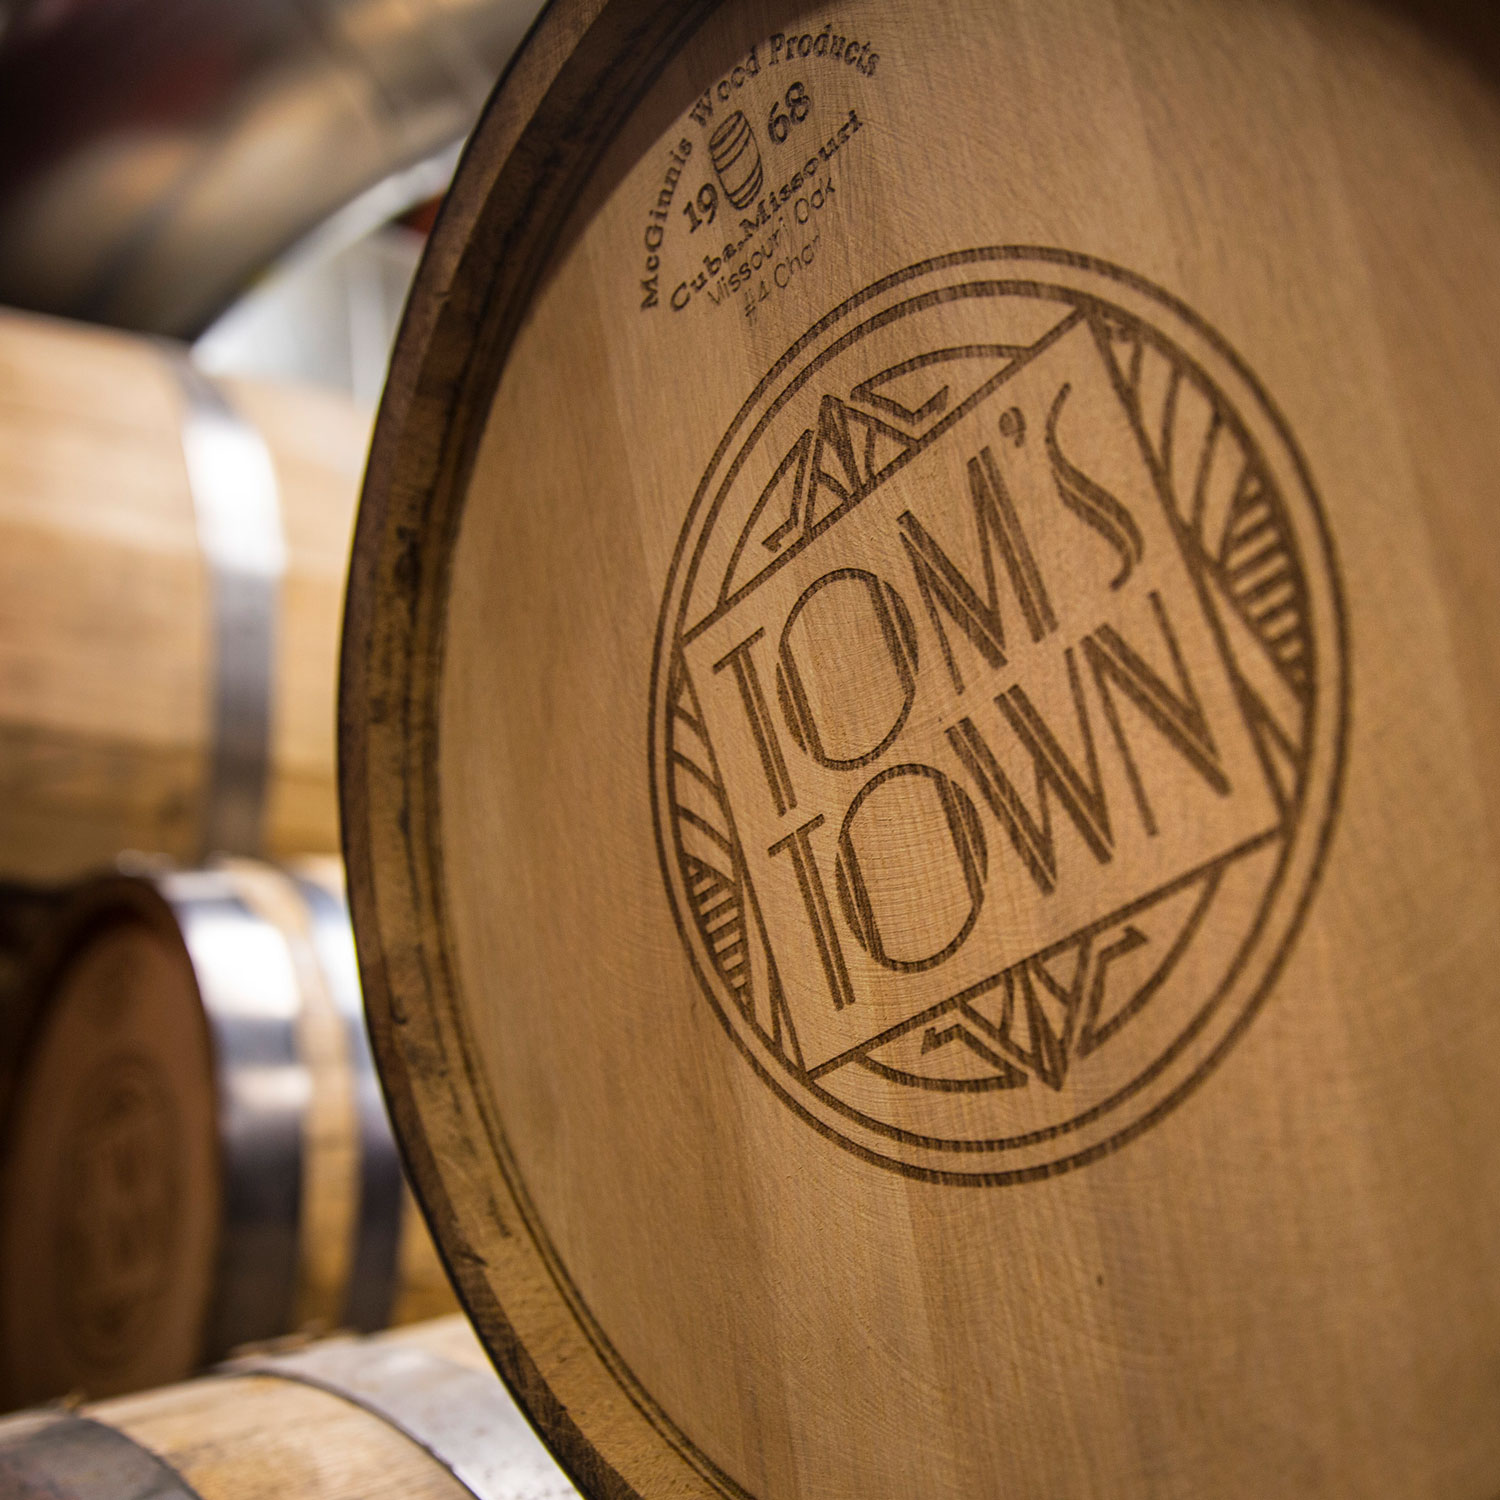 Delve deeper into the rich history of Kansas City's favorite distillery  Tom's Town Distiling Co. with our Tales of Tom's Town blog articles.